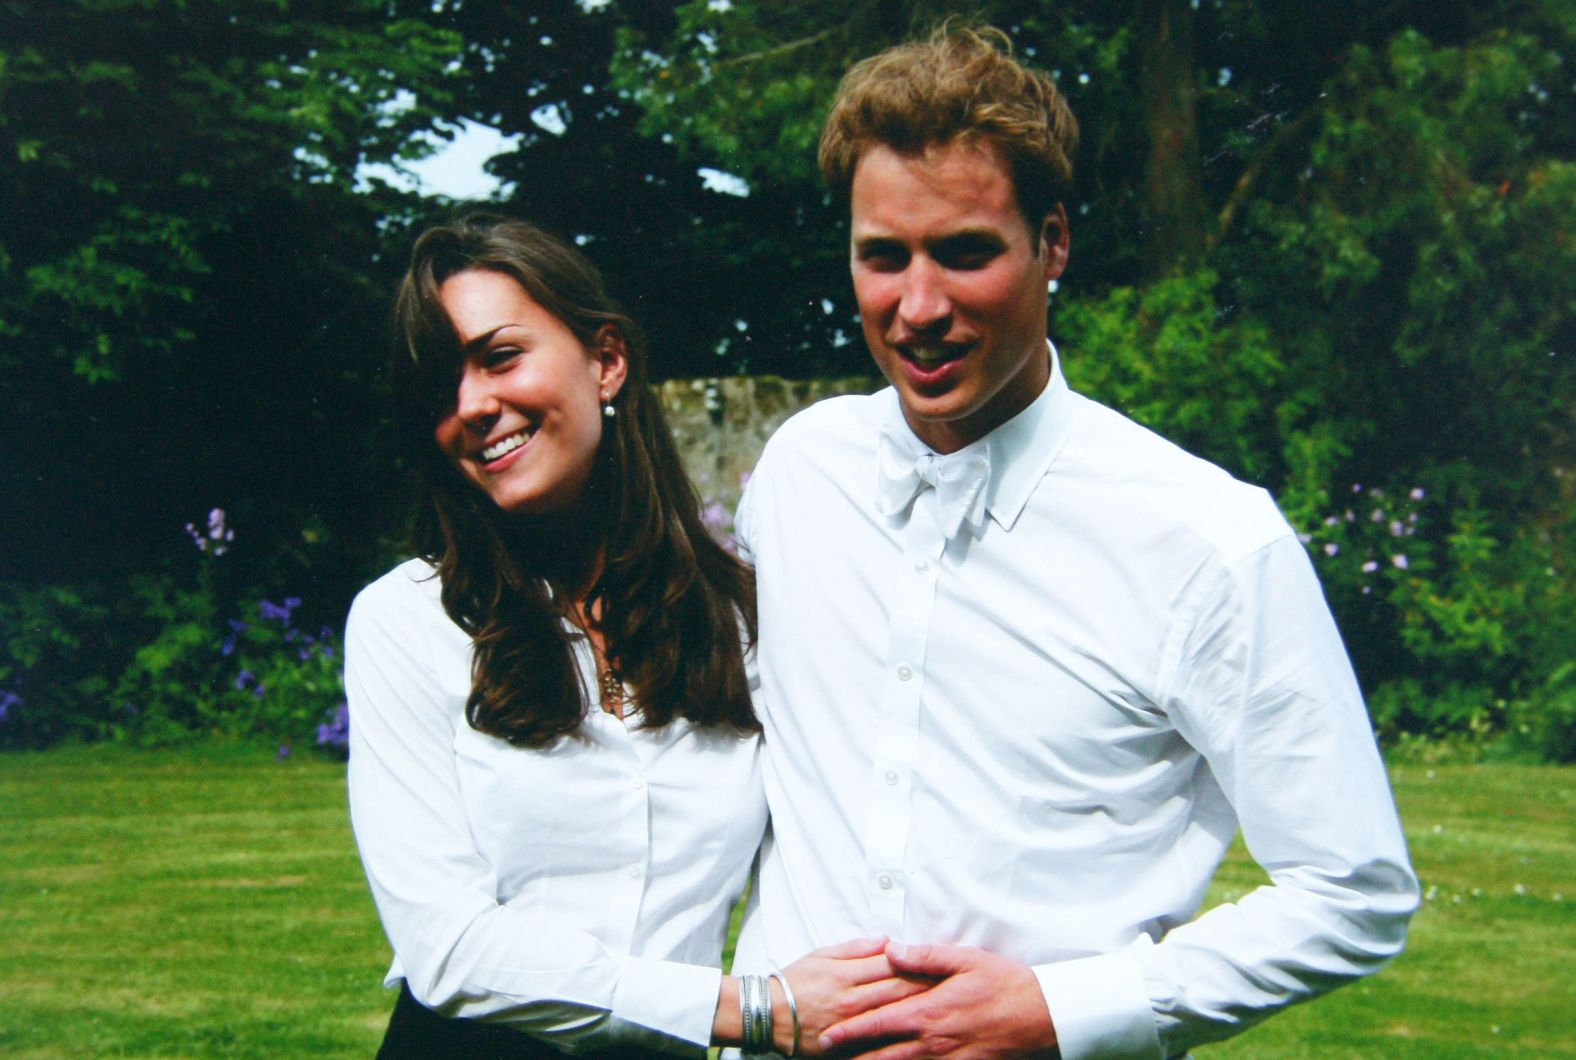 Kate and Prince William met at the University of St. Andrews in Scotland in 2001 and the pair started dating two years later. They are seen here on their graduation day in 2005.